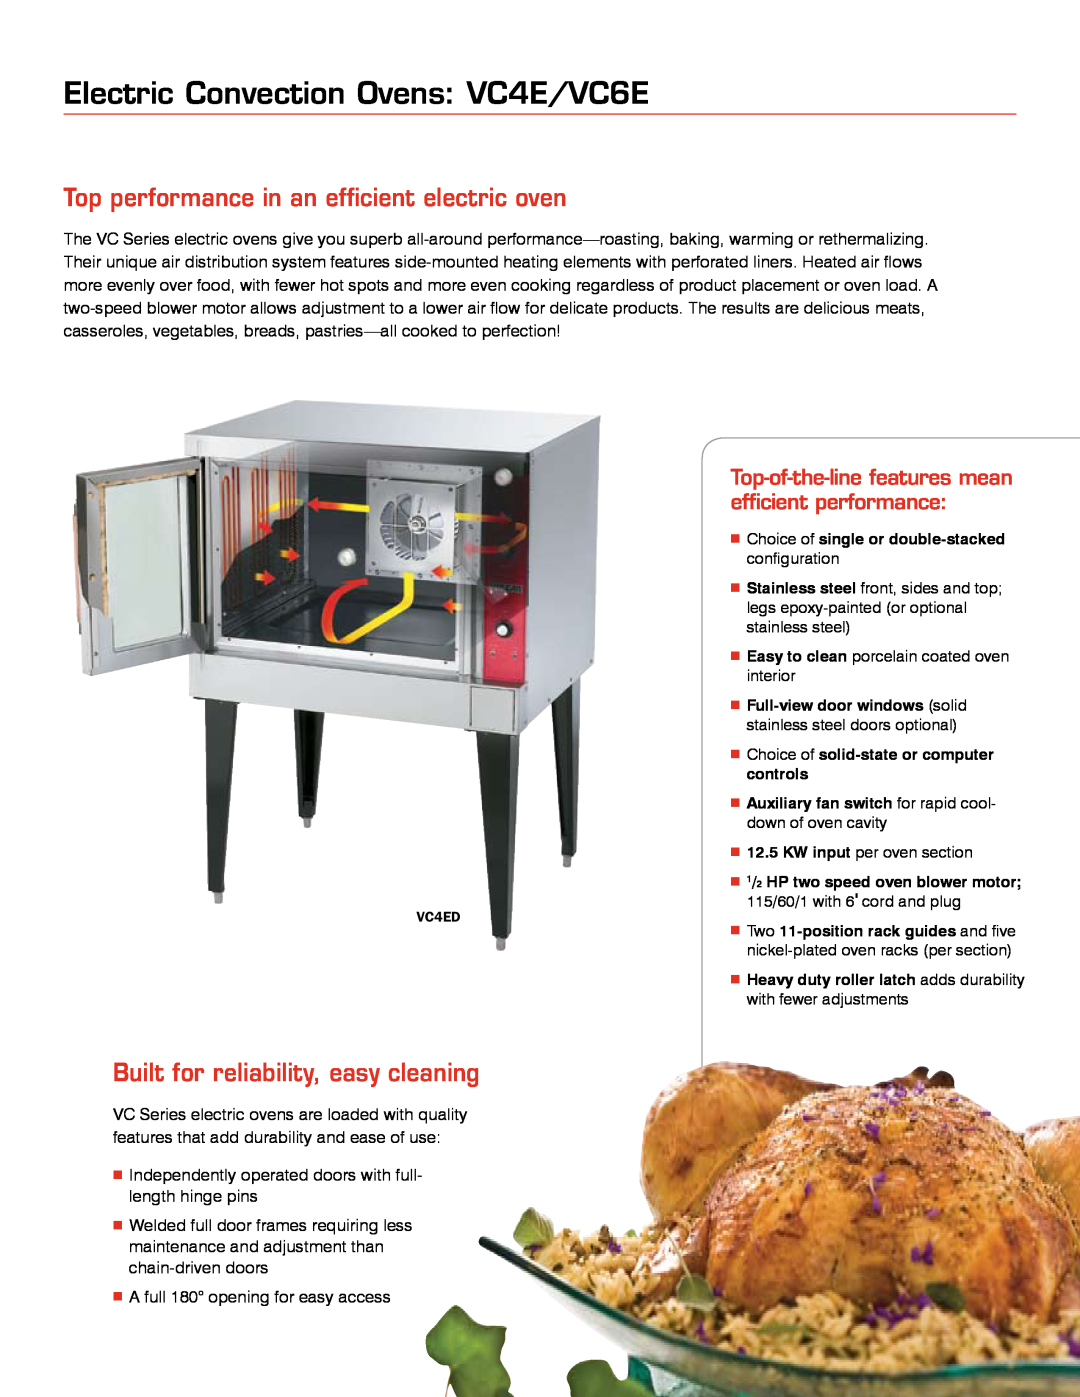 Vulcan-Hart VC6G manual Electric Convection Ovens VC4E/VC6E, Top performance in an efficient electric oven 